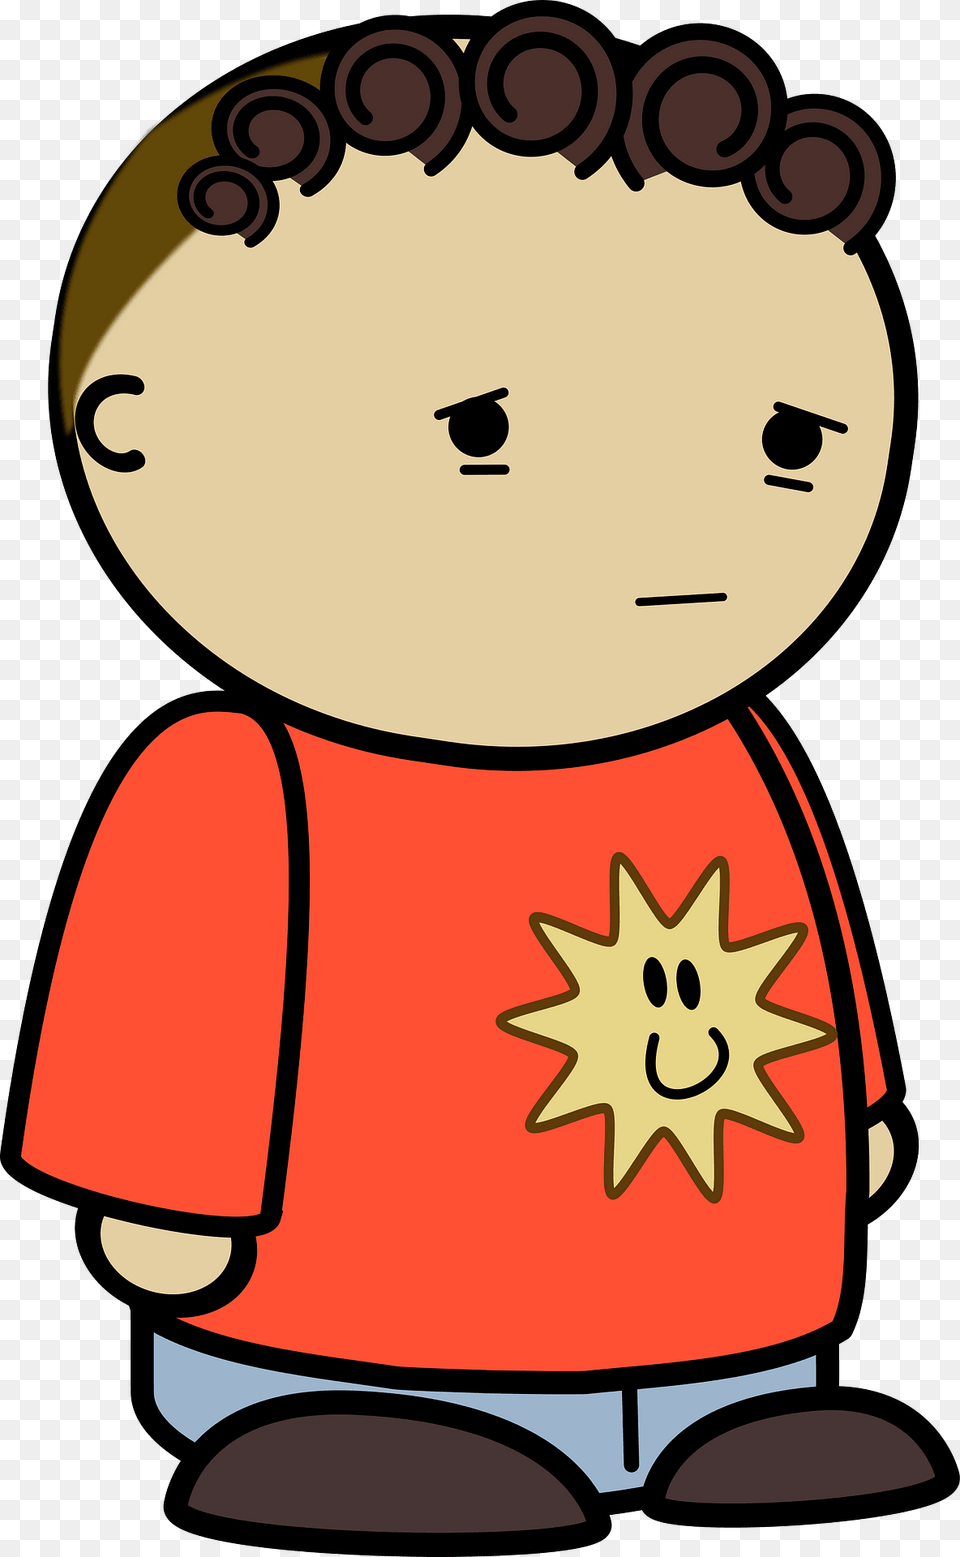 Curly Haired Boy In A Orange Shirt Sad Face To The Side Clipart Free Png Download